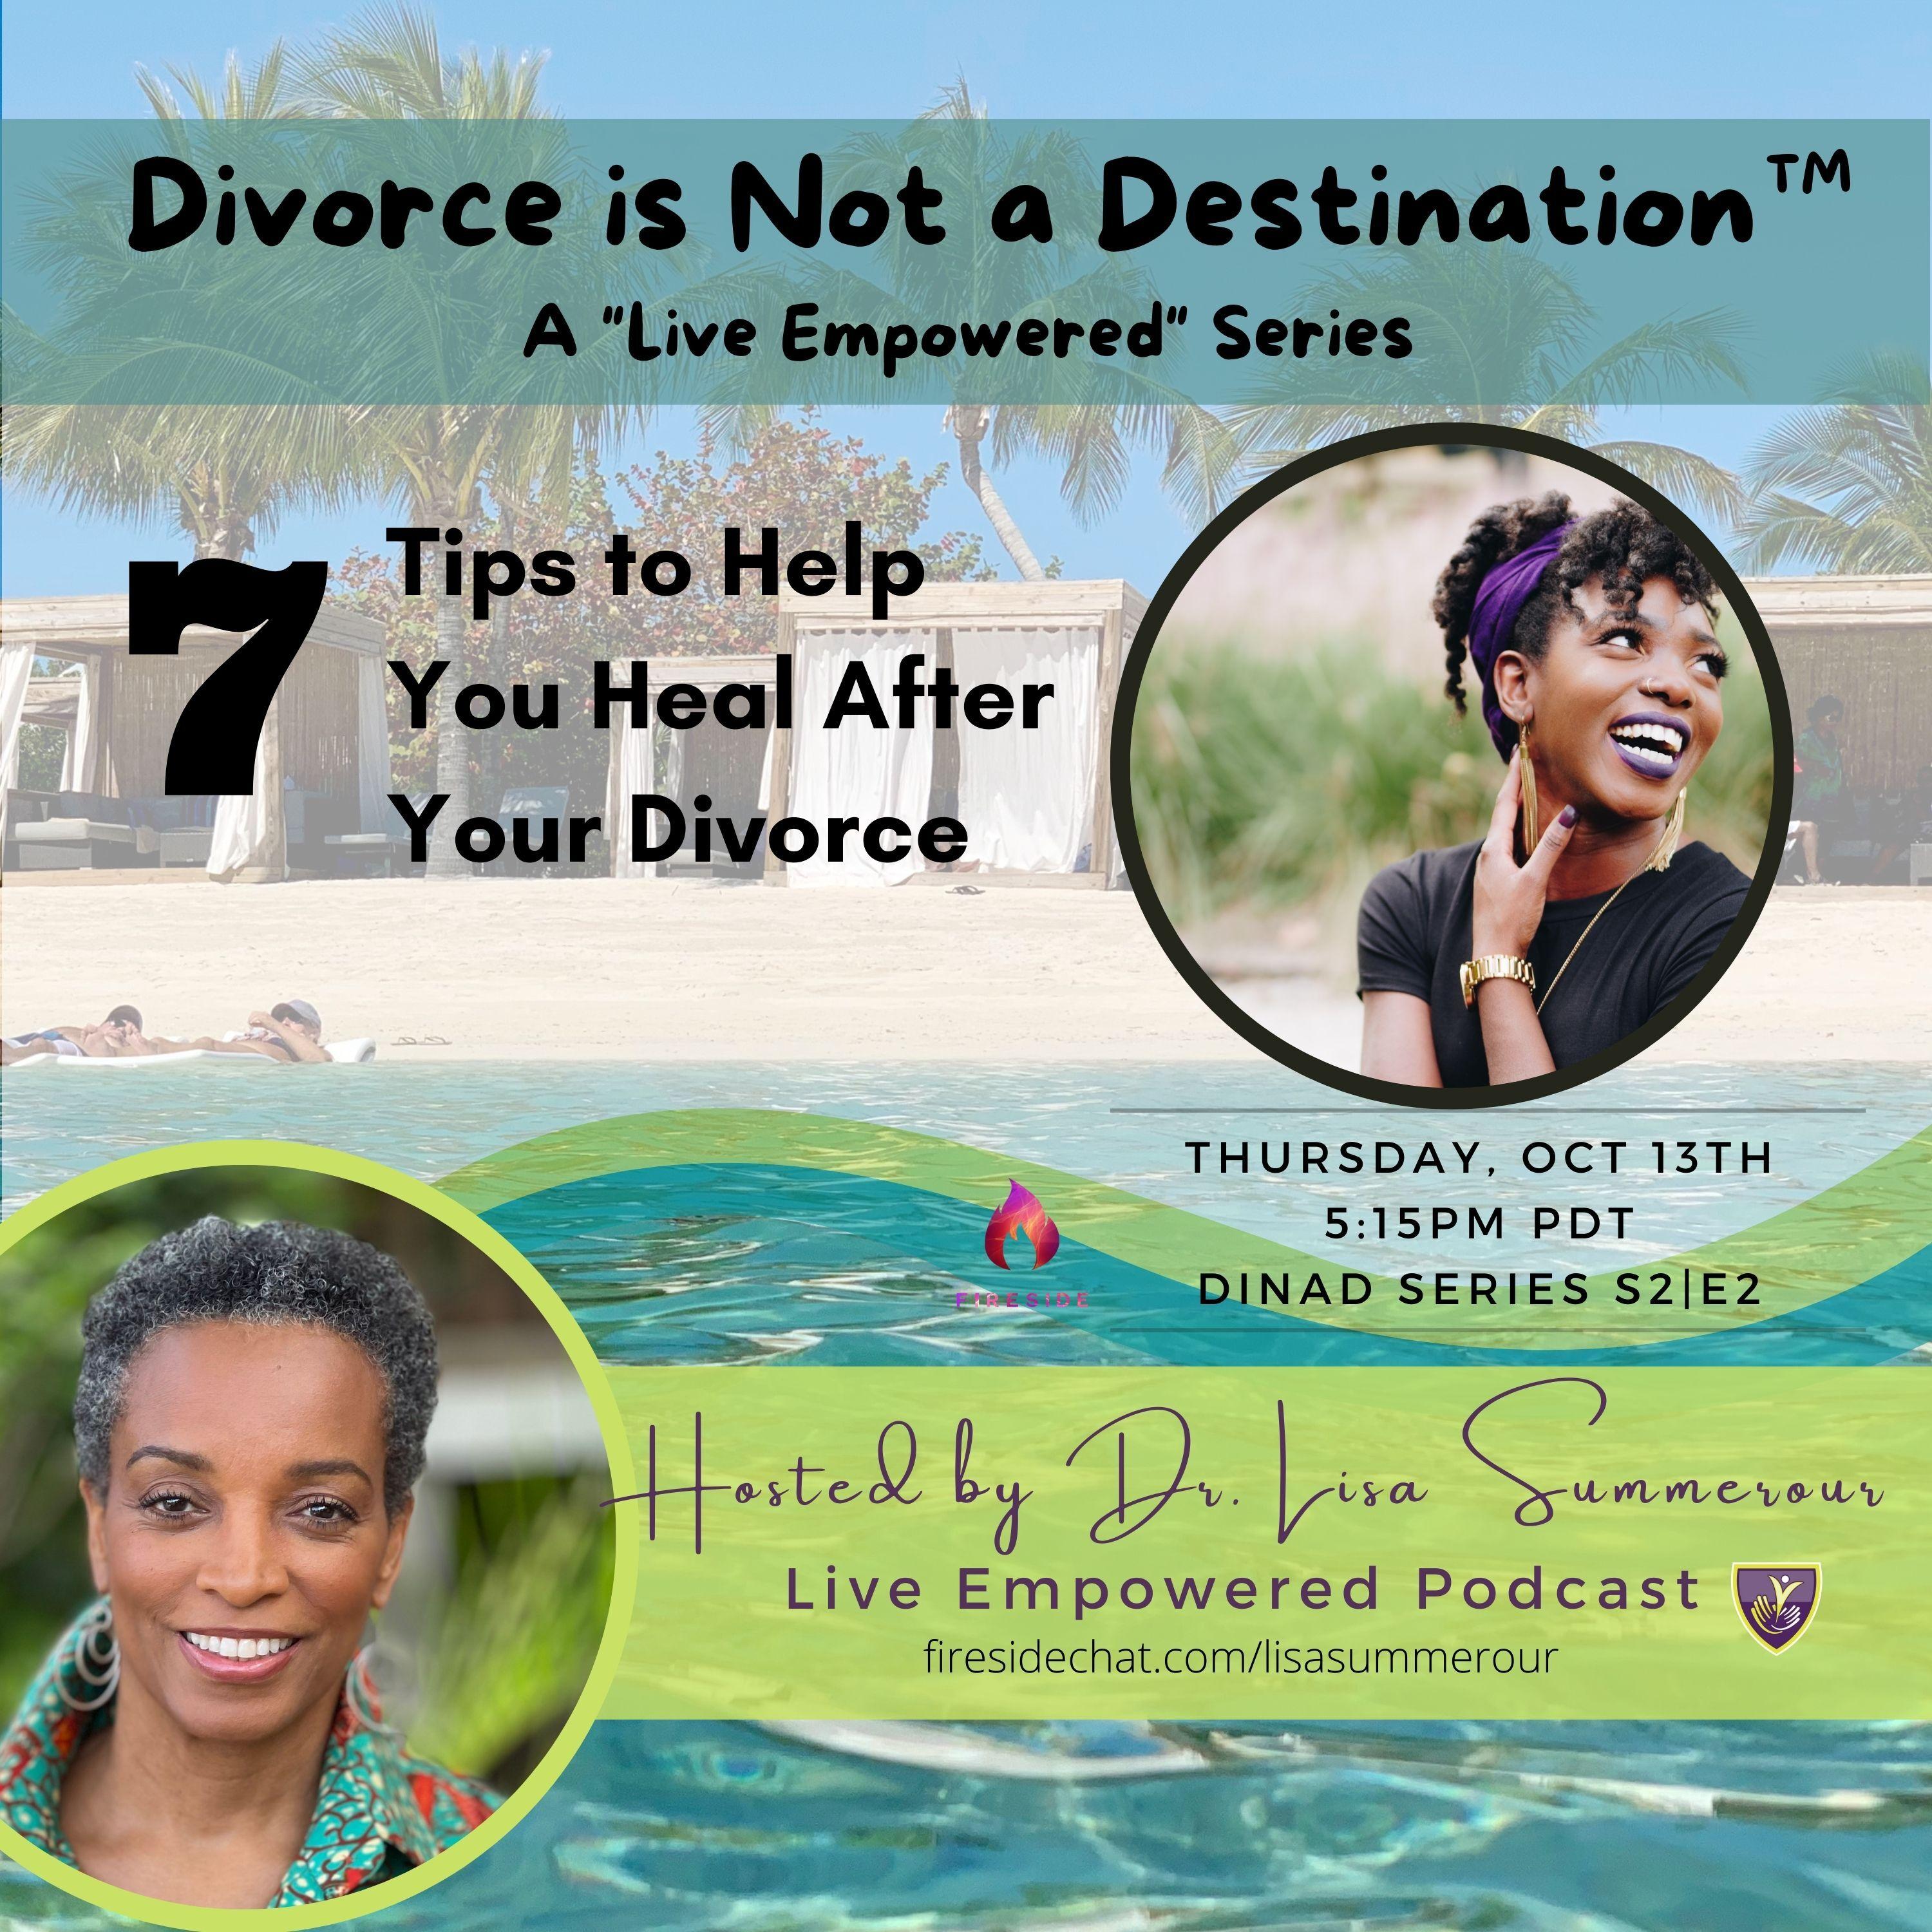 7 Tips to Help You Heal After Your Divorce